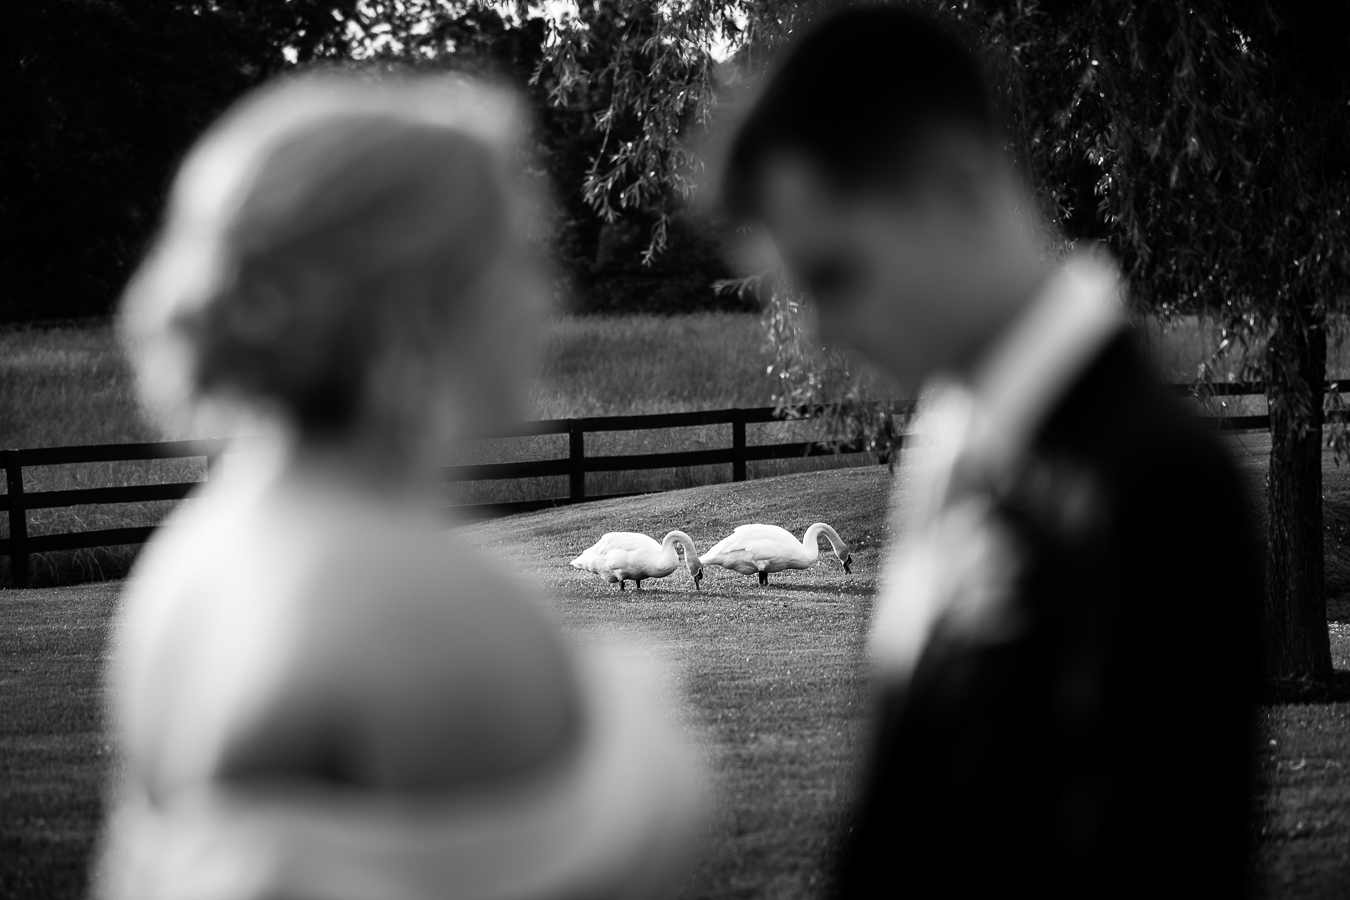 creative wedding photographer, lisa rhinehart, captures this black and white image of the bride and groom looking at one another with two swans standing in the field behind them at their viriginia wedding venue 